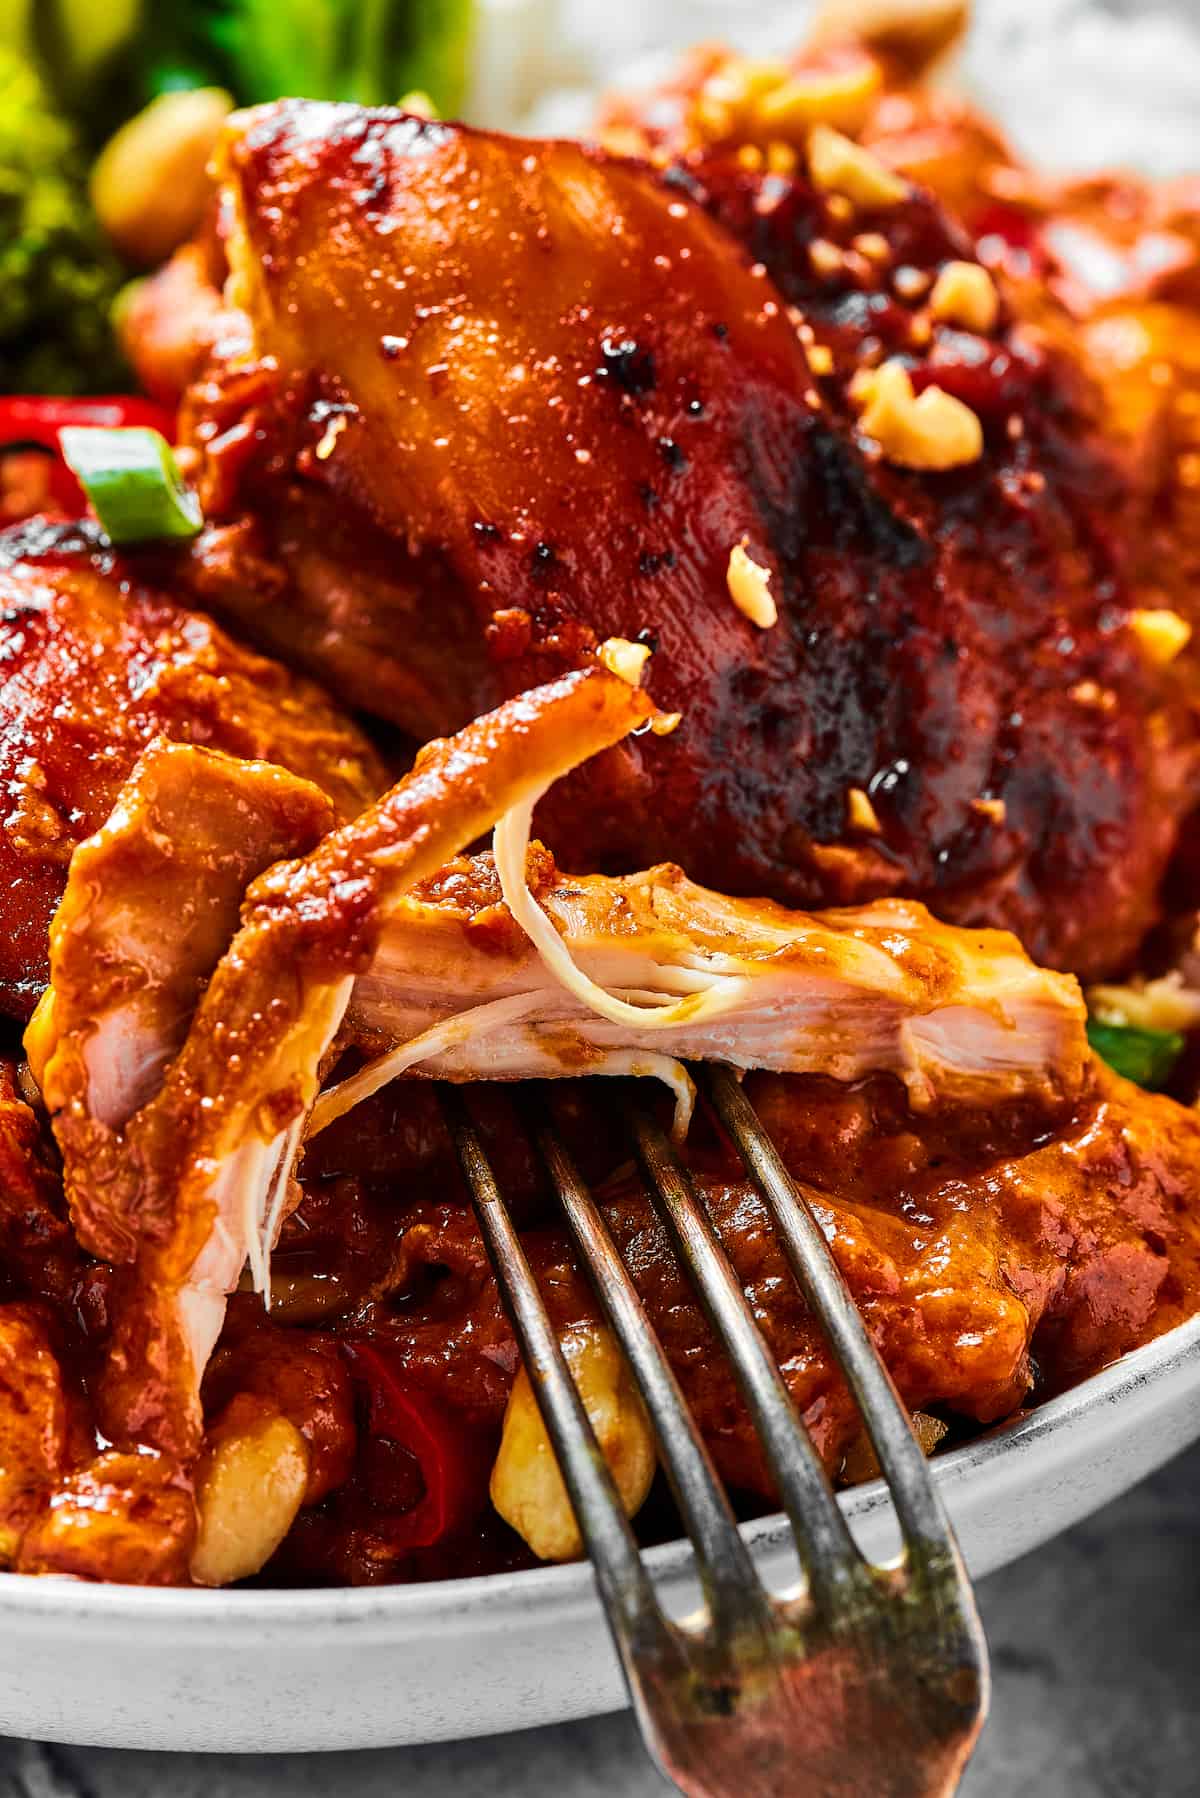 A close-up shot of a chicken thigh cooked in peanut sauce, with a fork pulling away a bite.